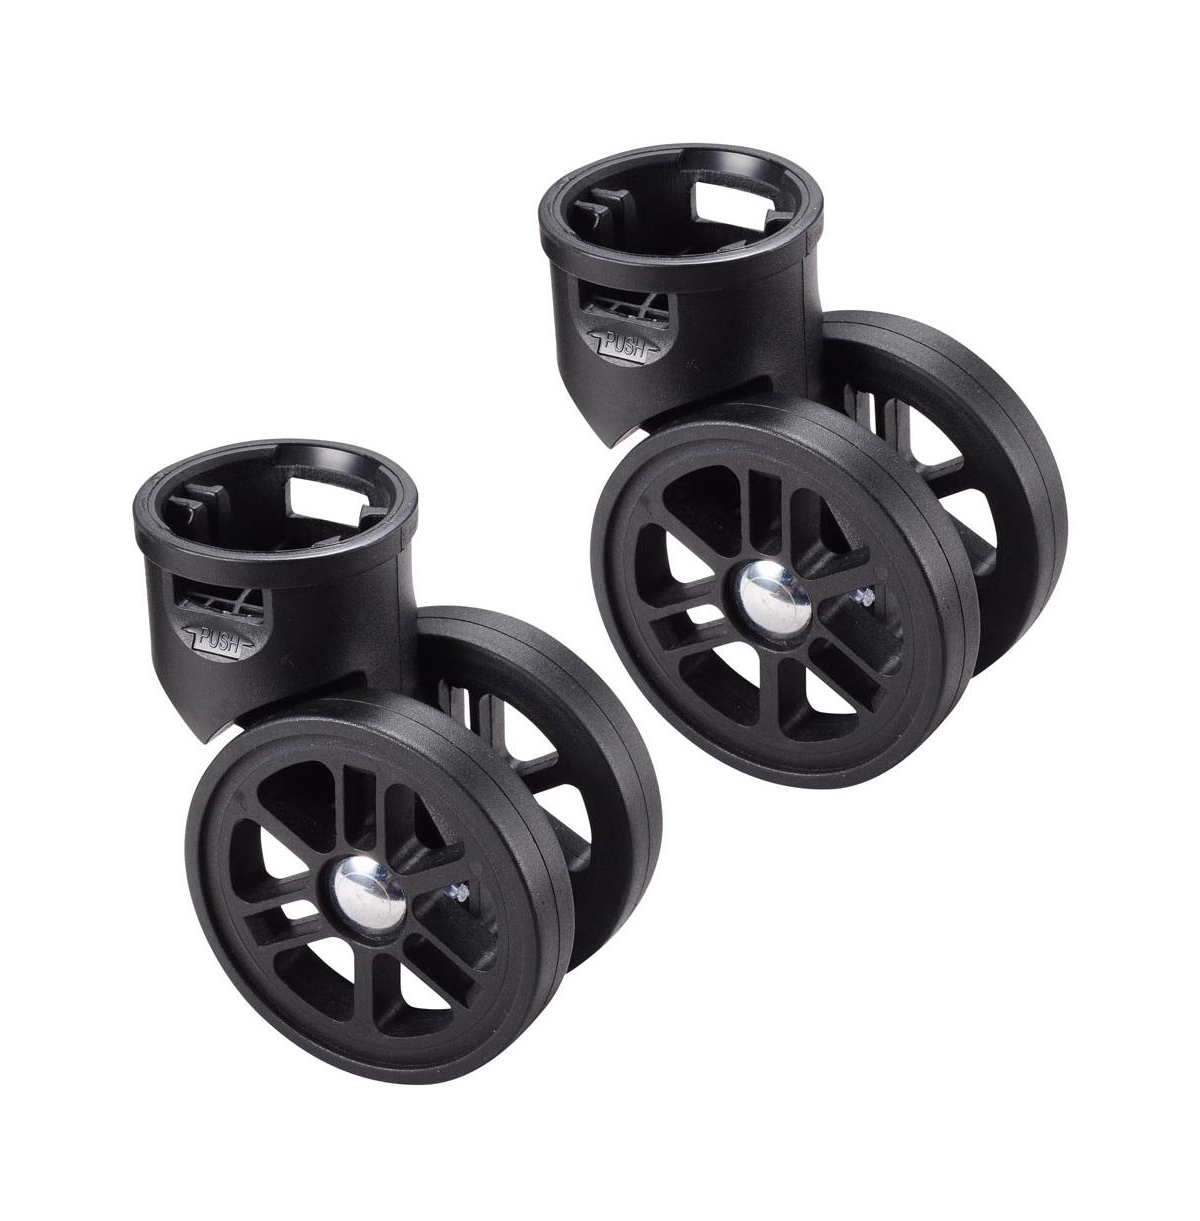 2Pcs 2" Swivel Replacement Wheels 360 Degree Rotate Caster for Aw Makeup Case - Black